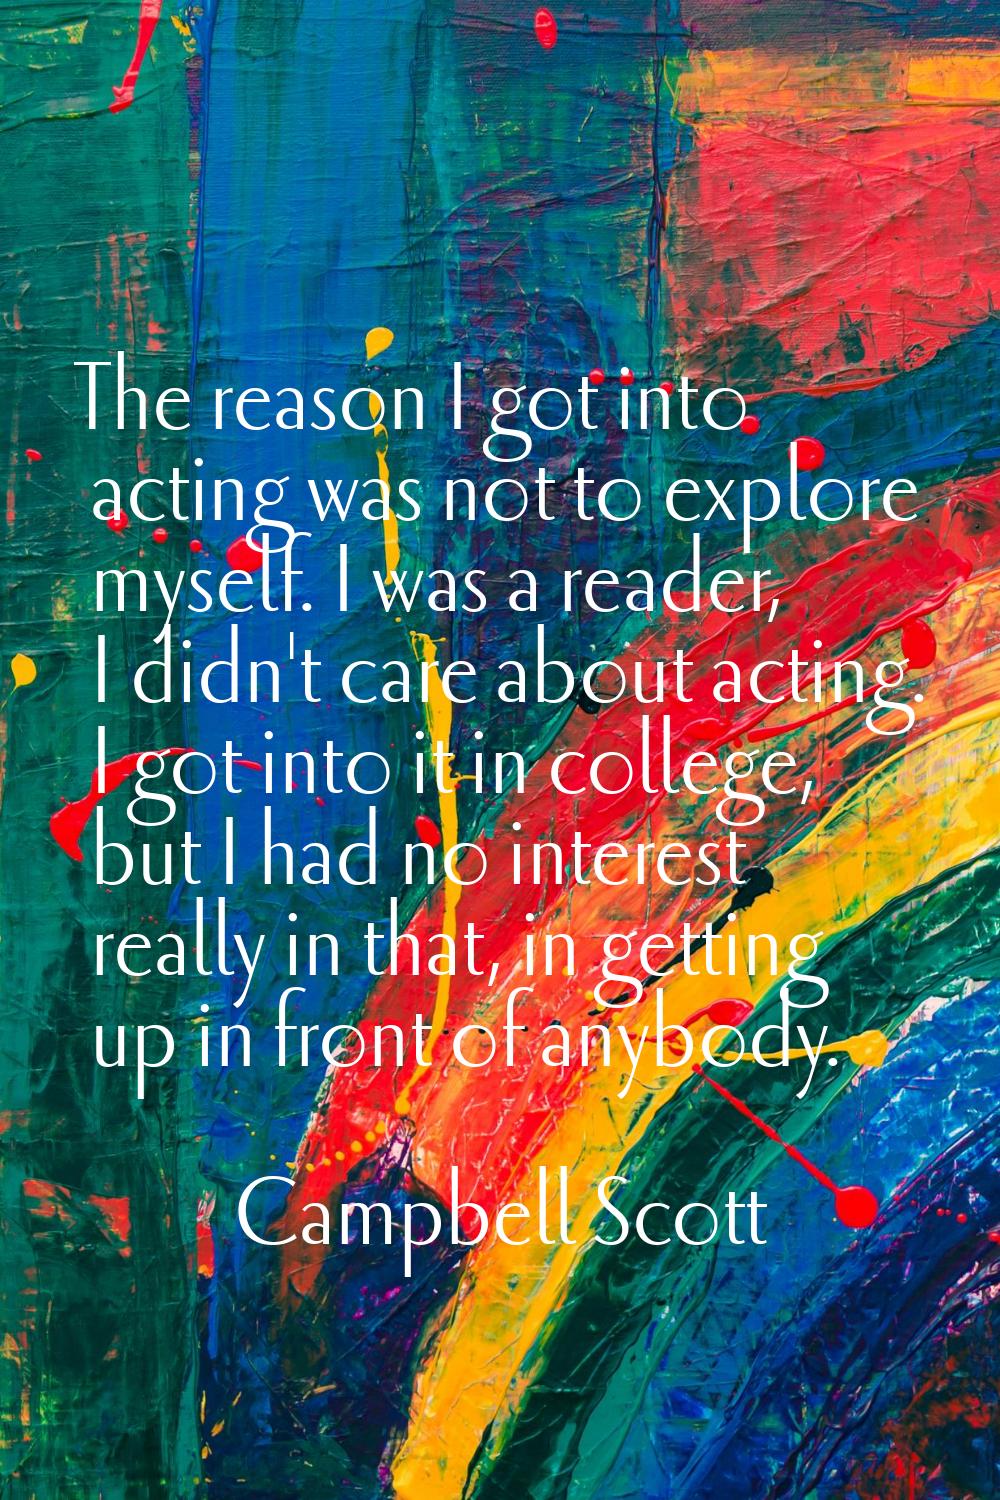 The reason I got into acting was not to explore myself. I was a reader, I didn't care about acting.